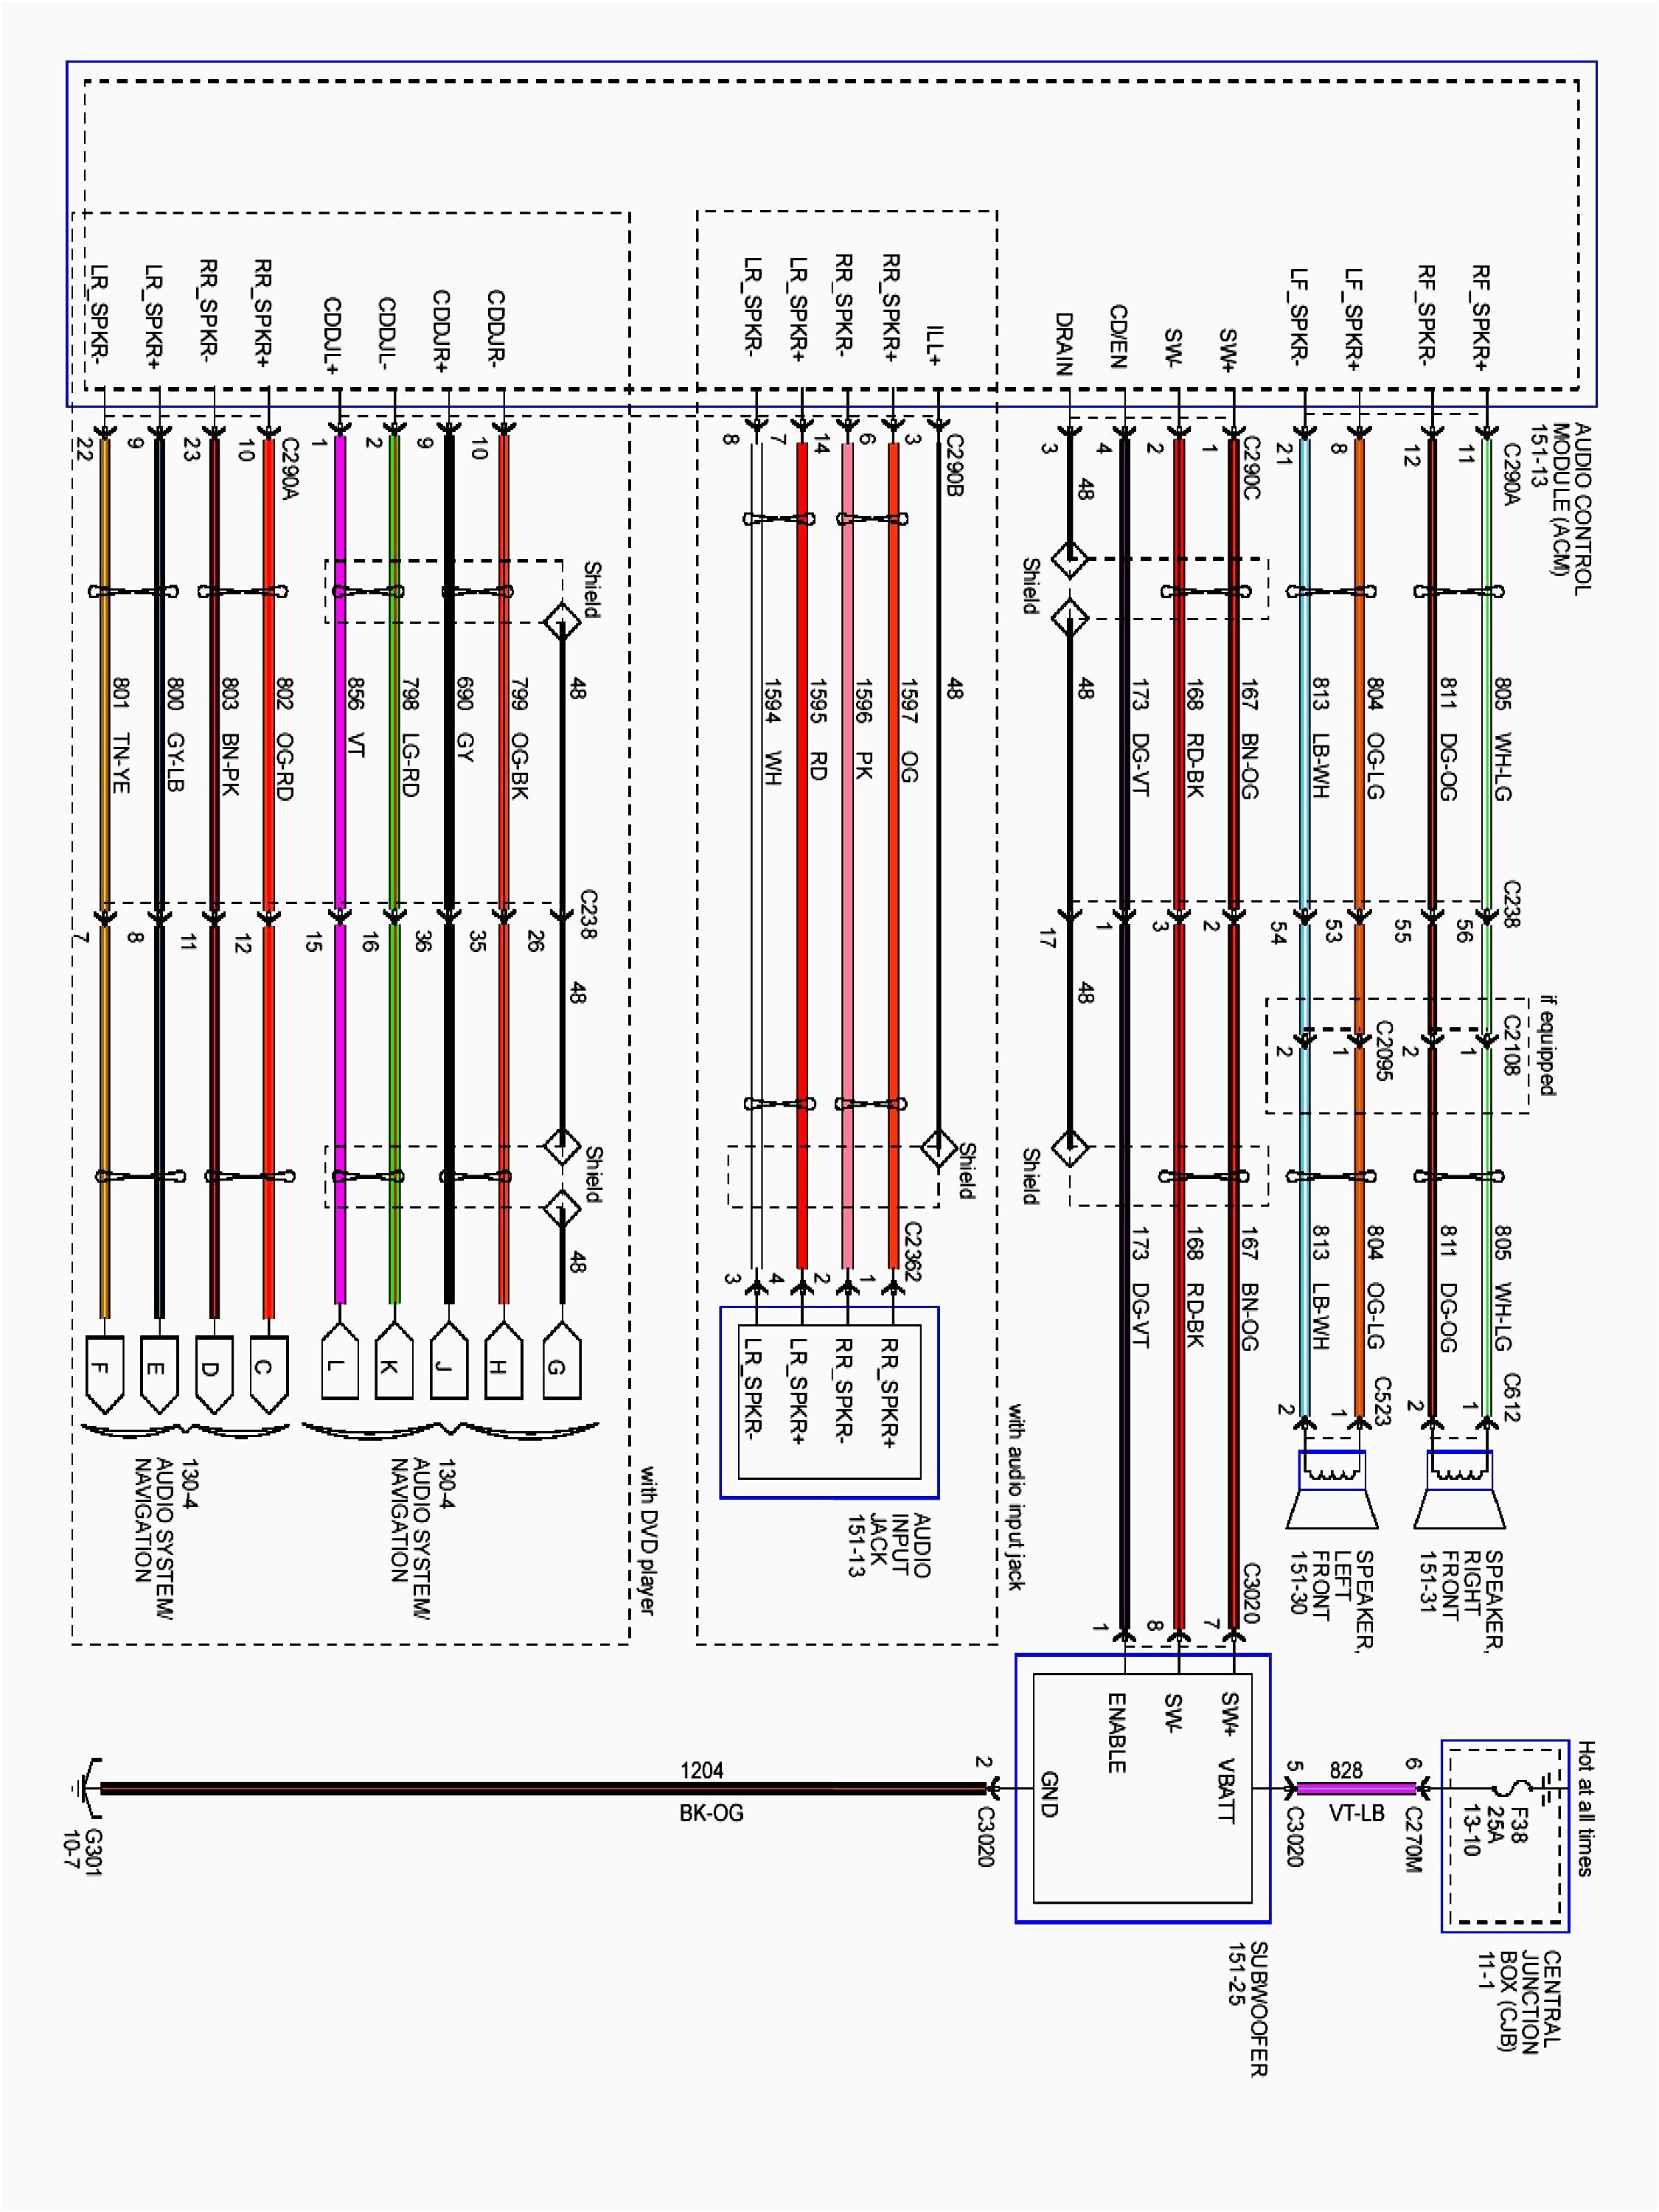 Wiring Diagram For 2002 Ford Taurus from detoxicrecenze.com